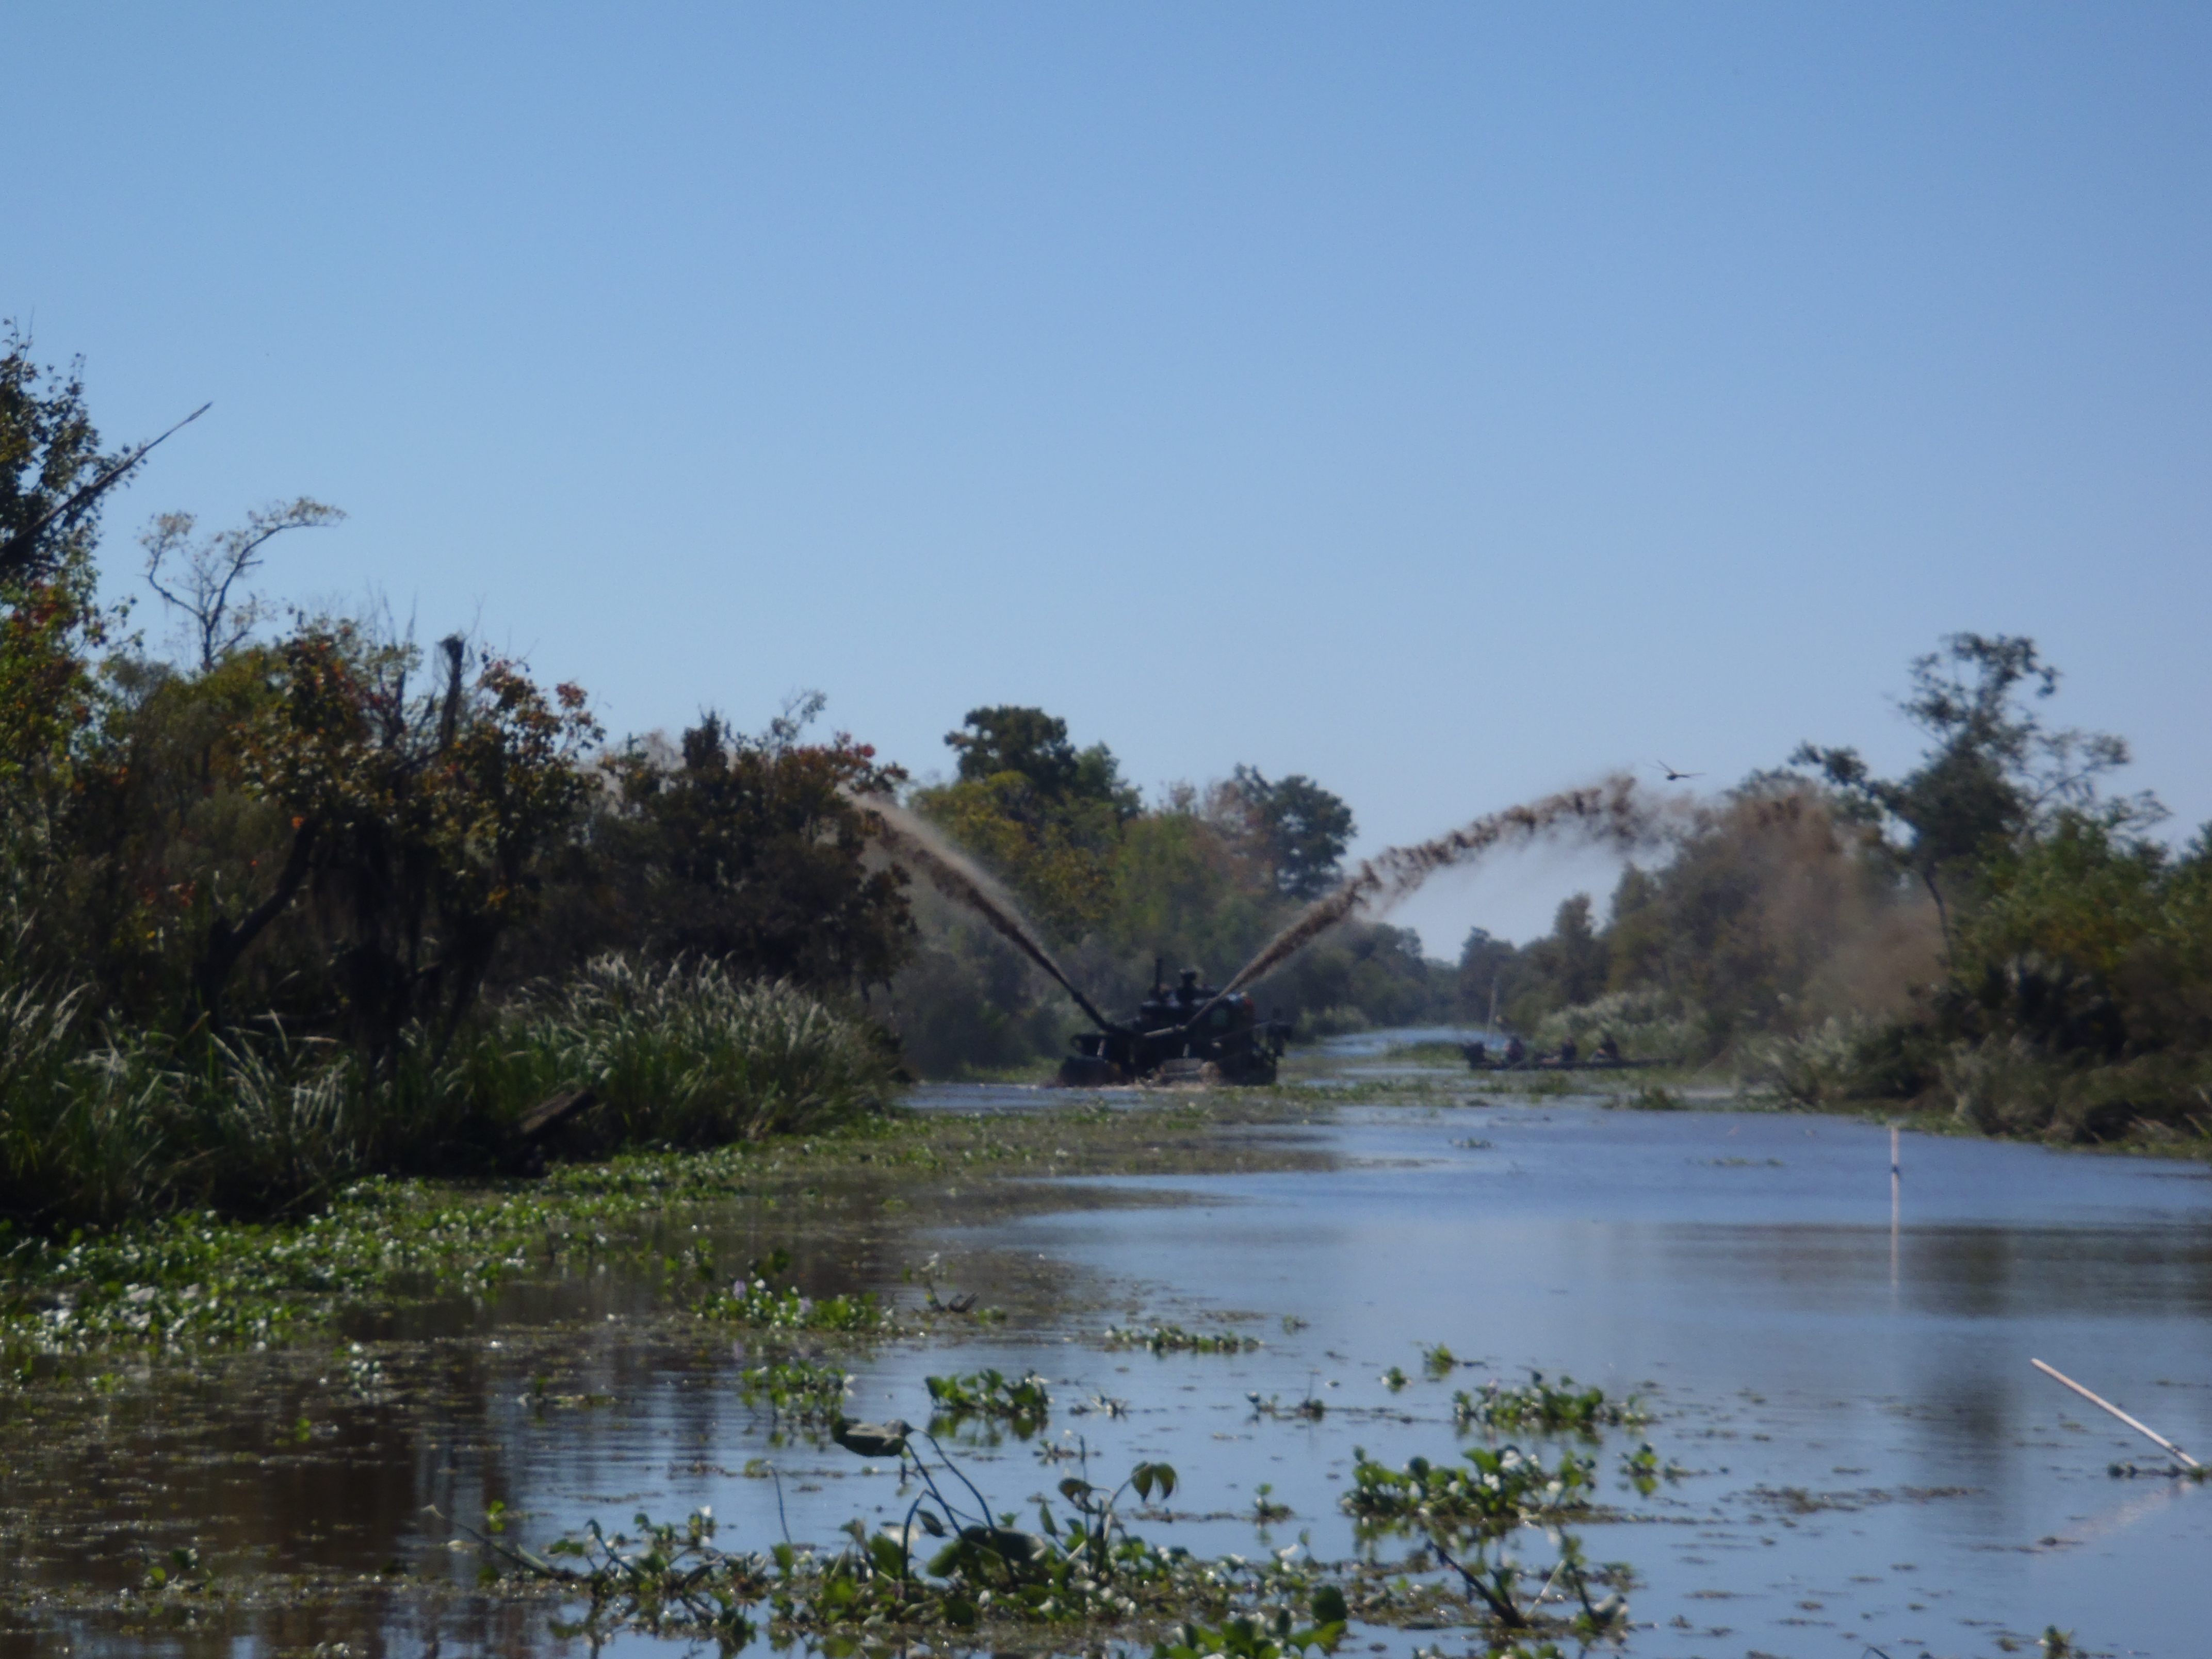 Spray dredge distribution helps to restore the normal hydrology and keep the marsh healthy